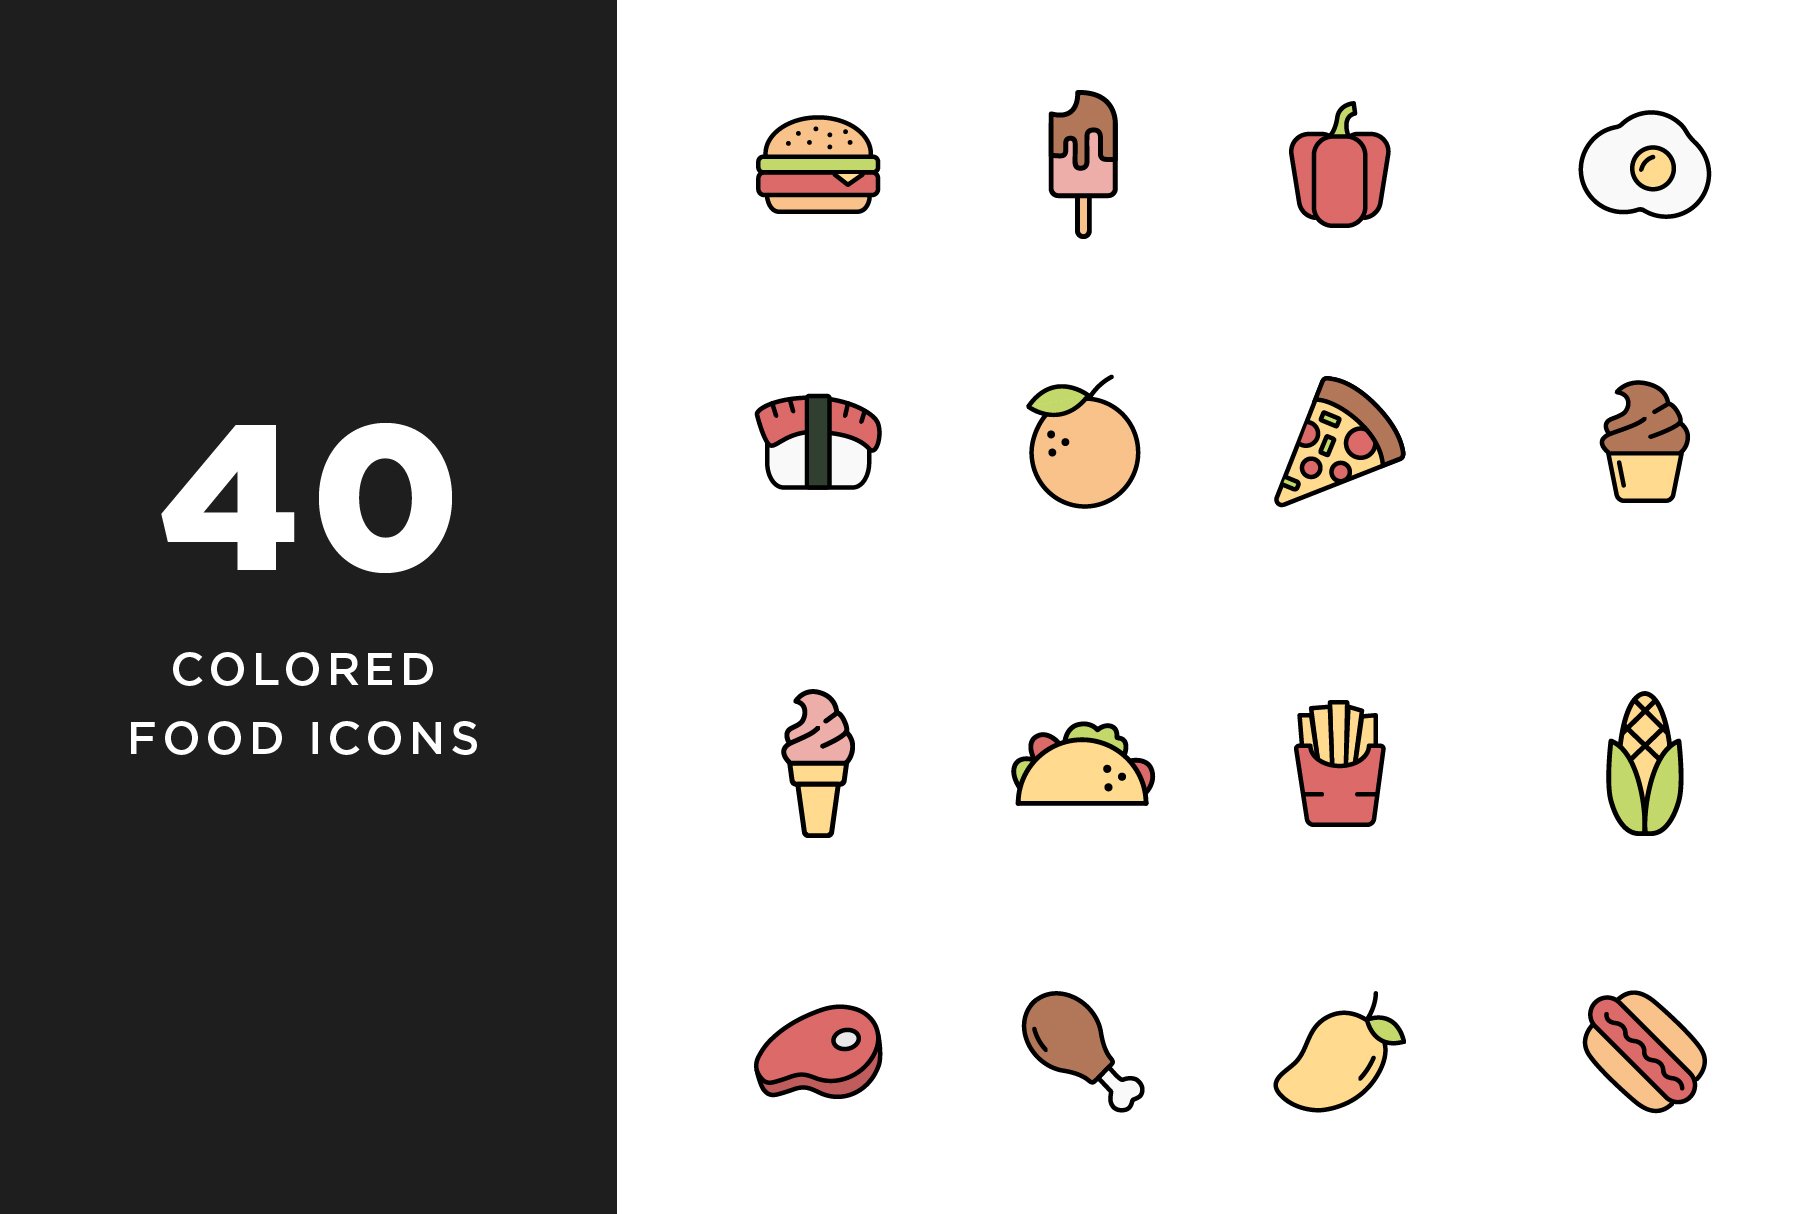 40 Colorful Food Icons cover image.